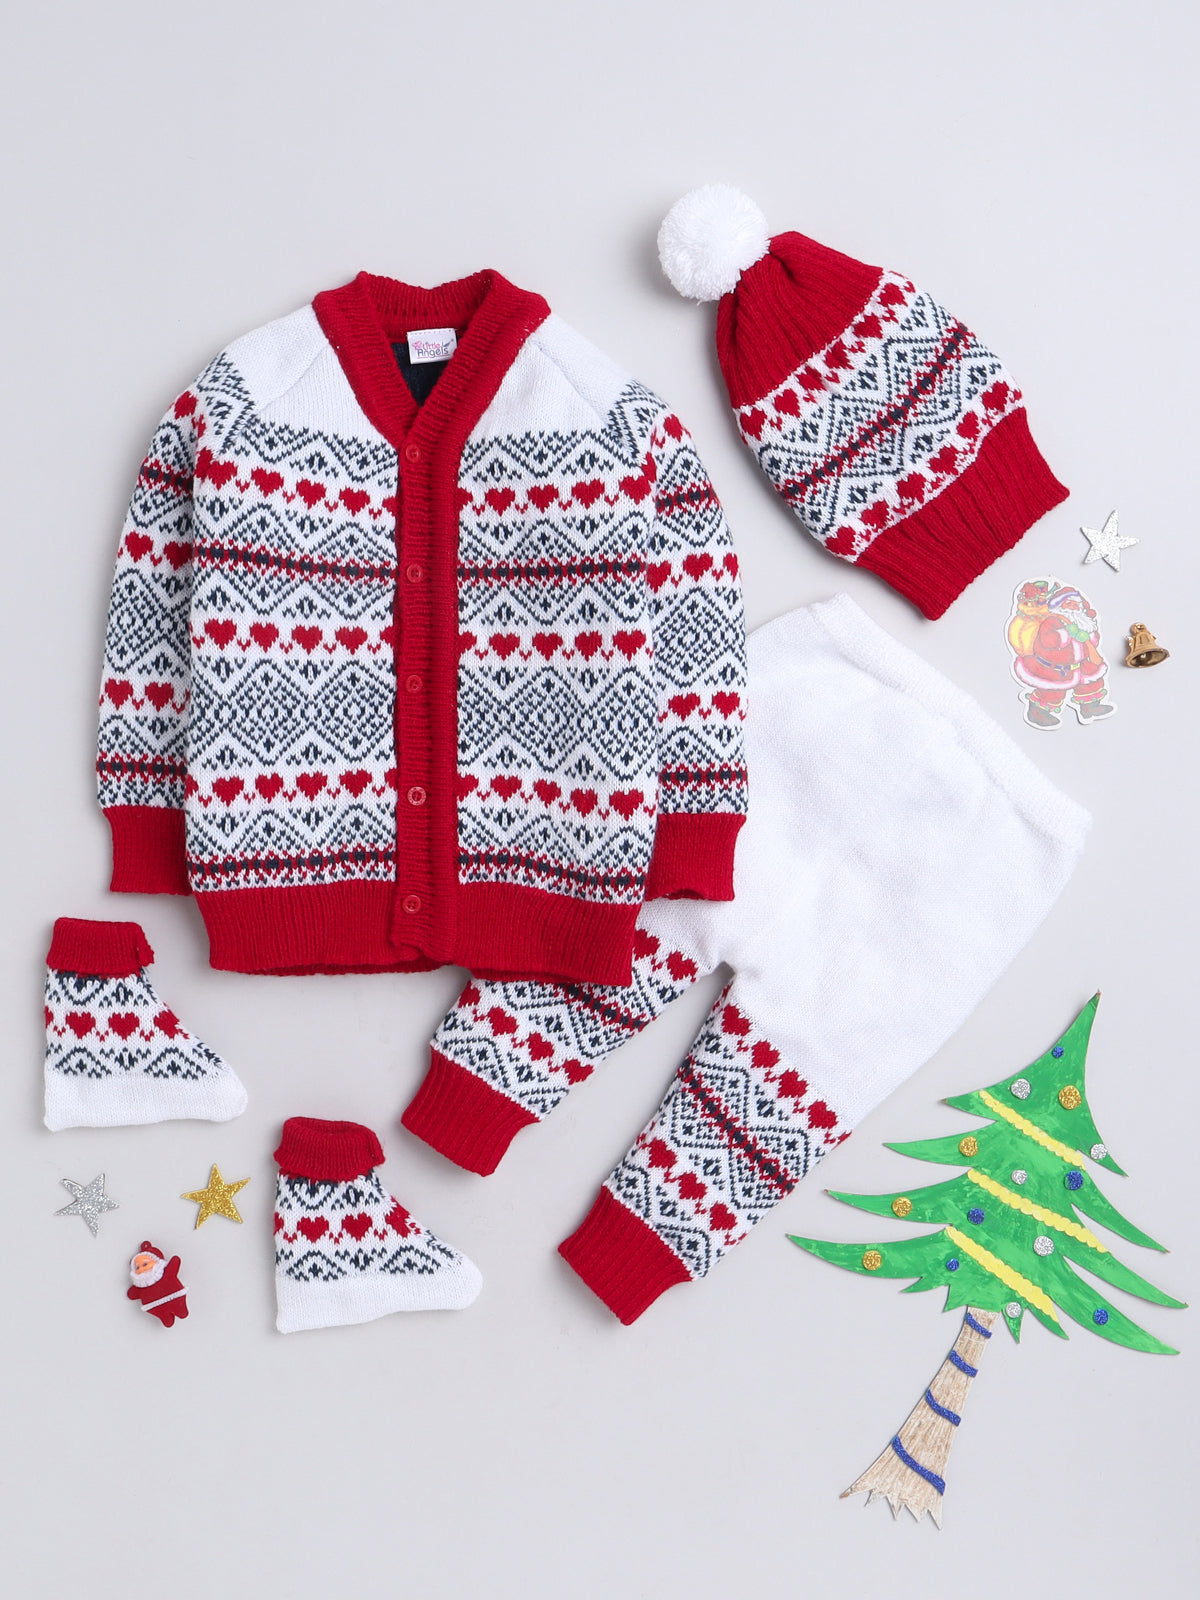 Little Angels Christmas Delight Knitted Baby Outfit Set - Red and White Sweater with Pant, Cap, and Socks